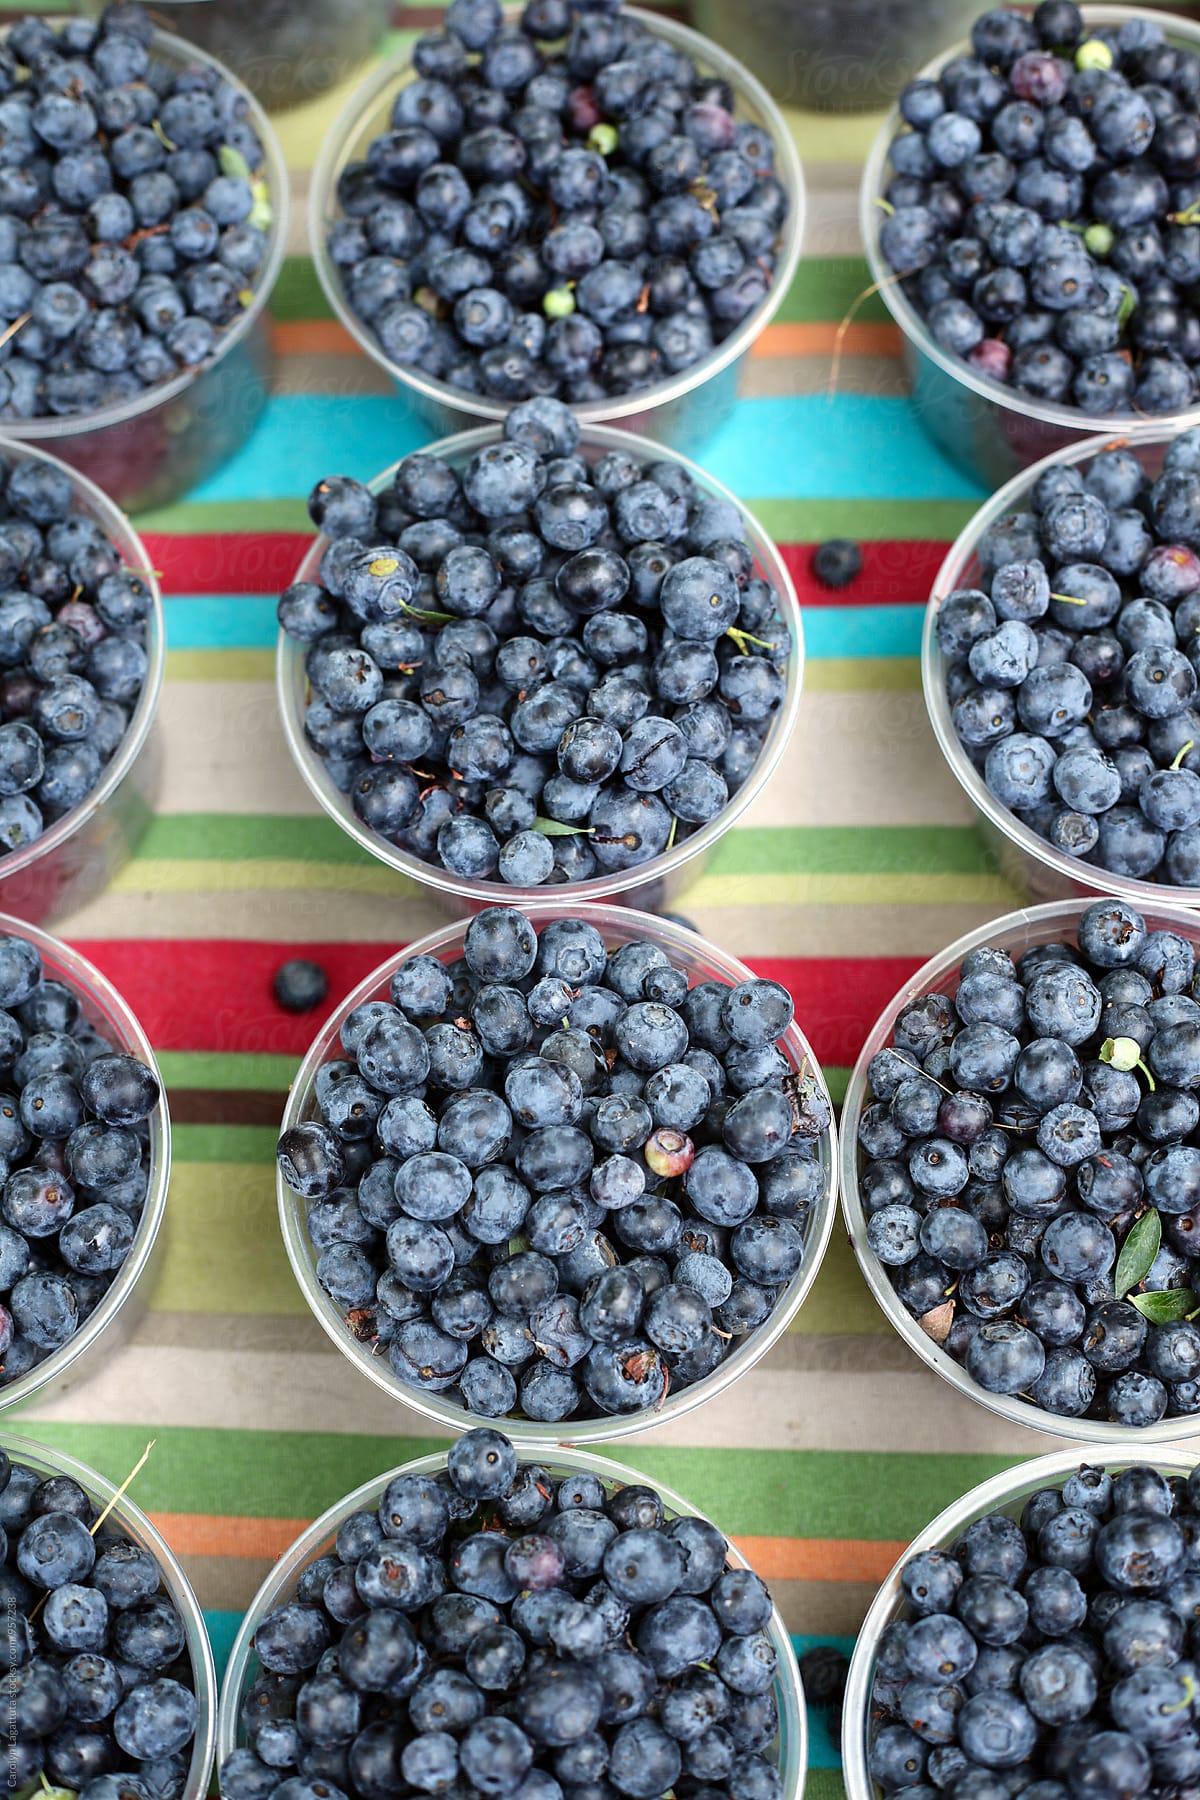 Many cups of wild, organic blueberries